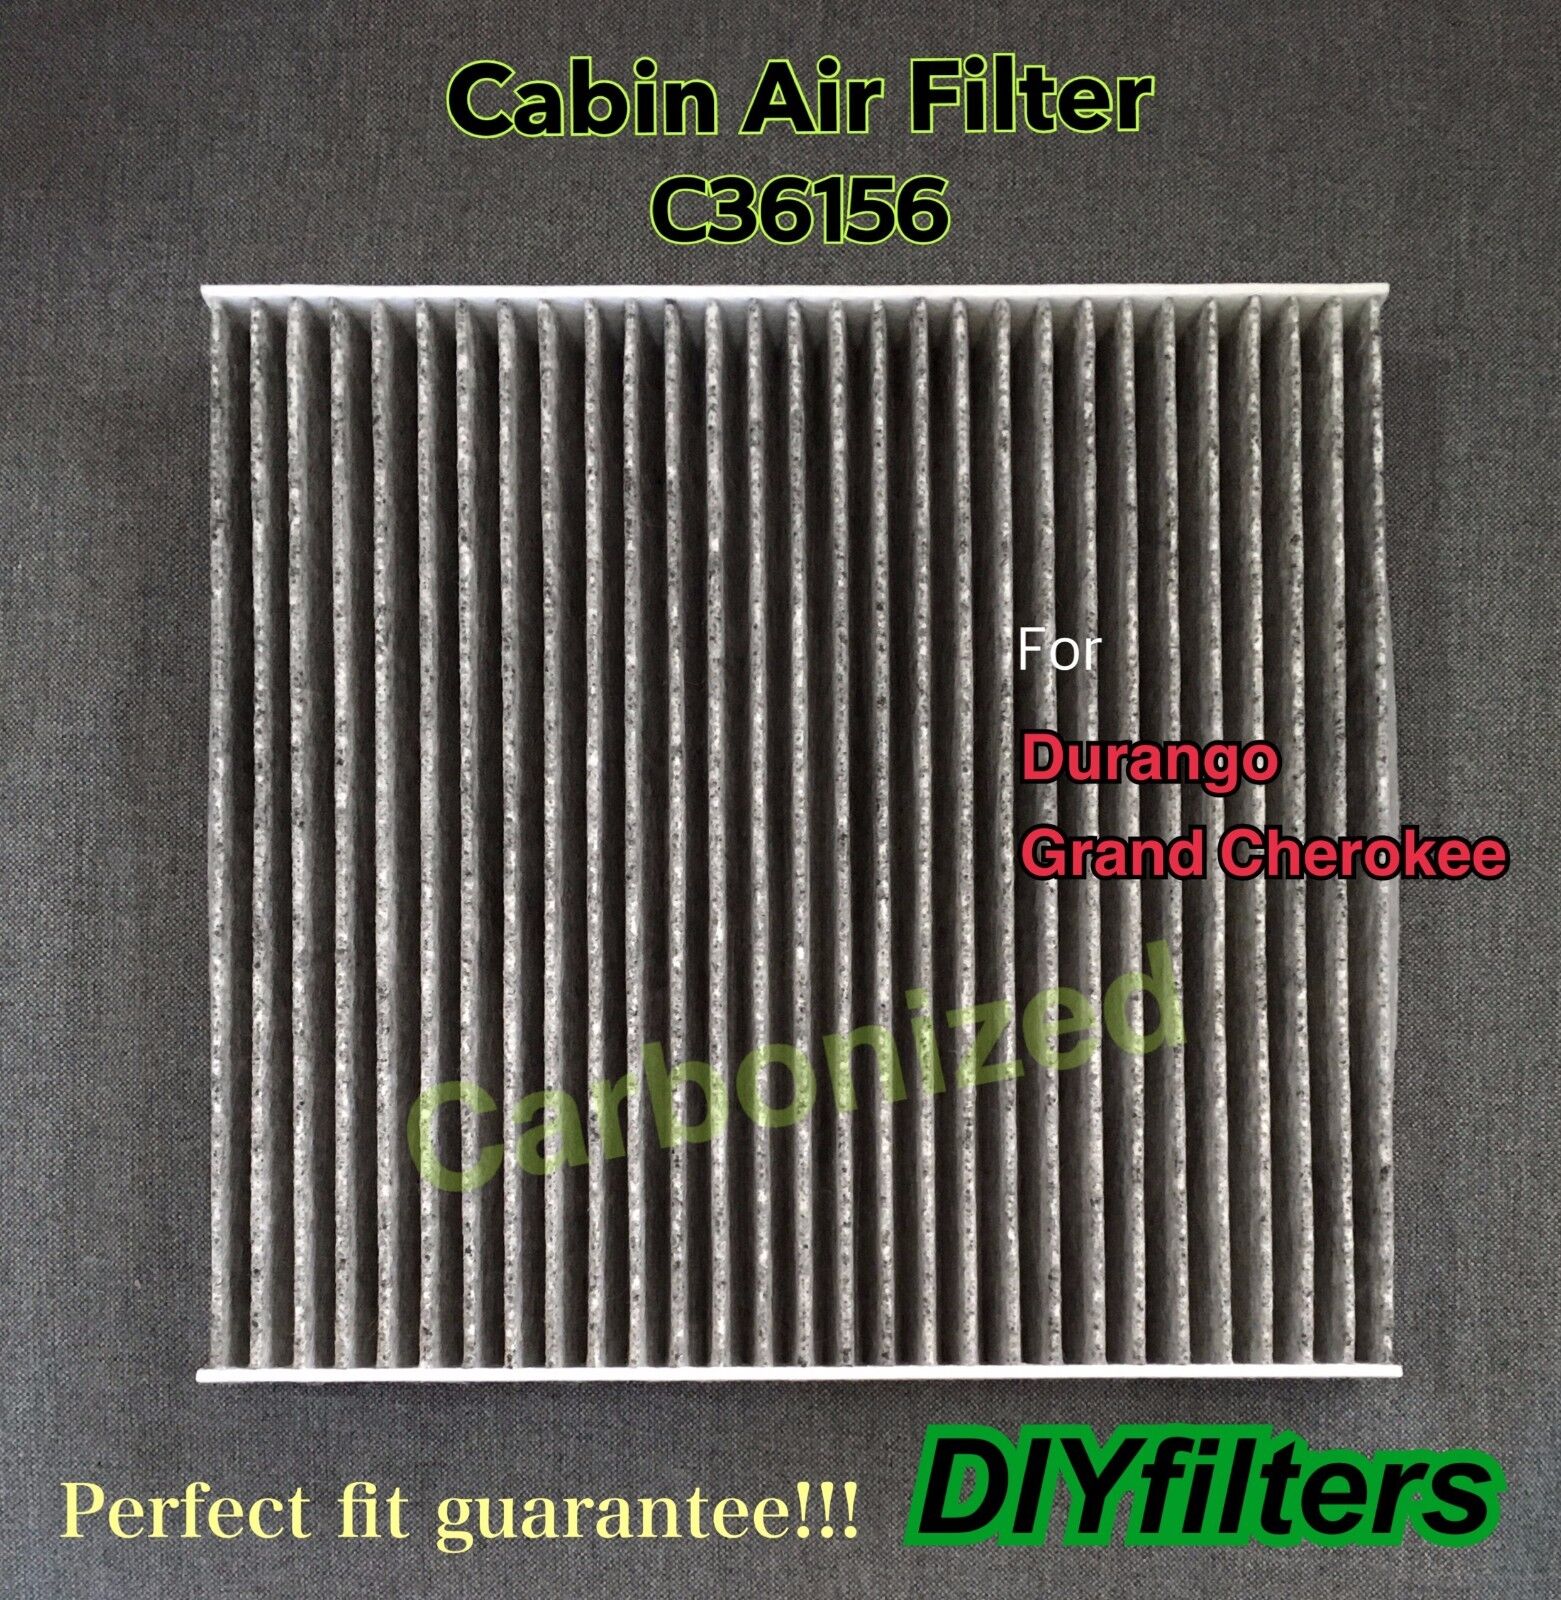 C36156 CARBONIZED Cabin AIR FILTER For Durango 11-21 Grand Cherokee 11-20 